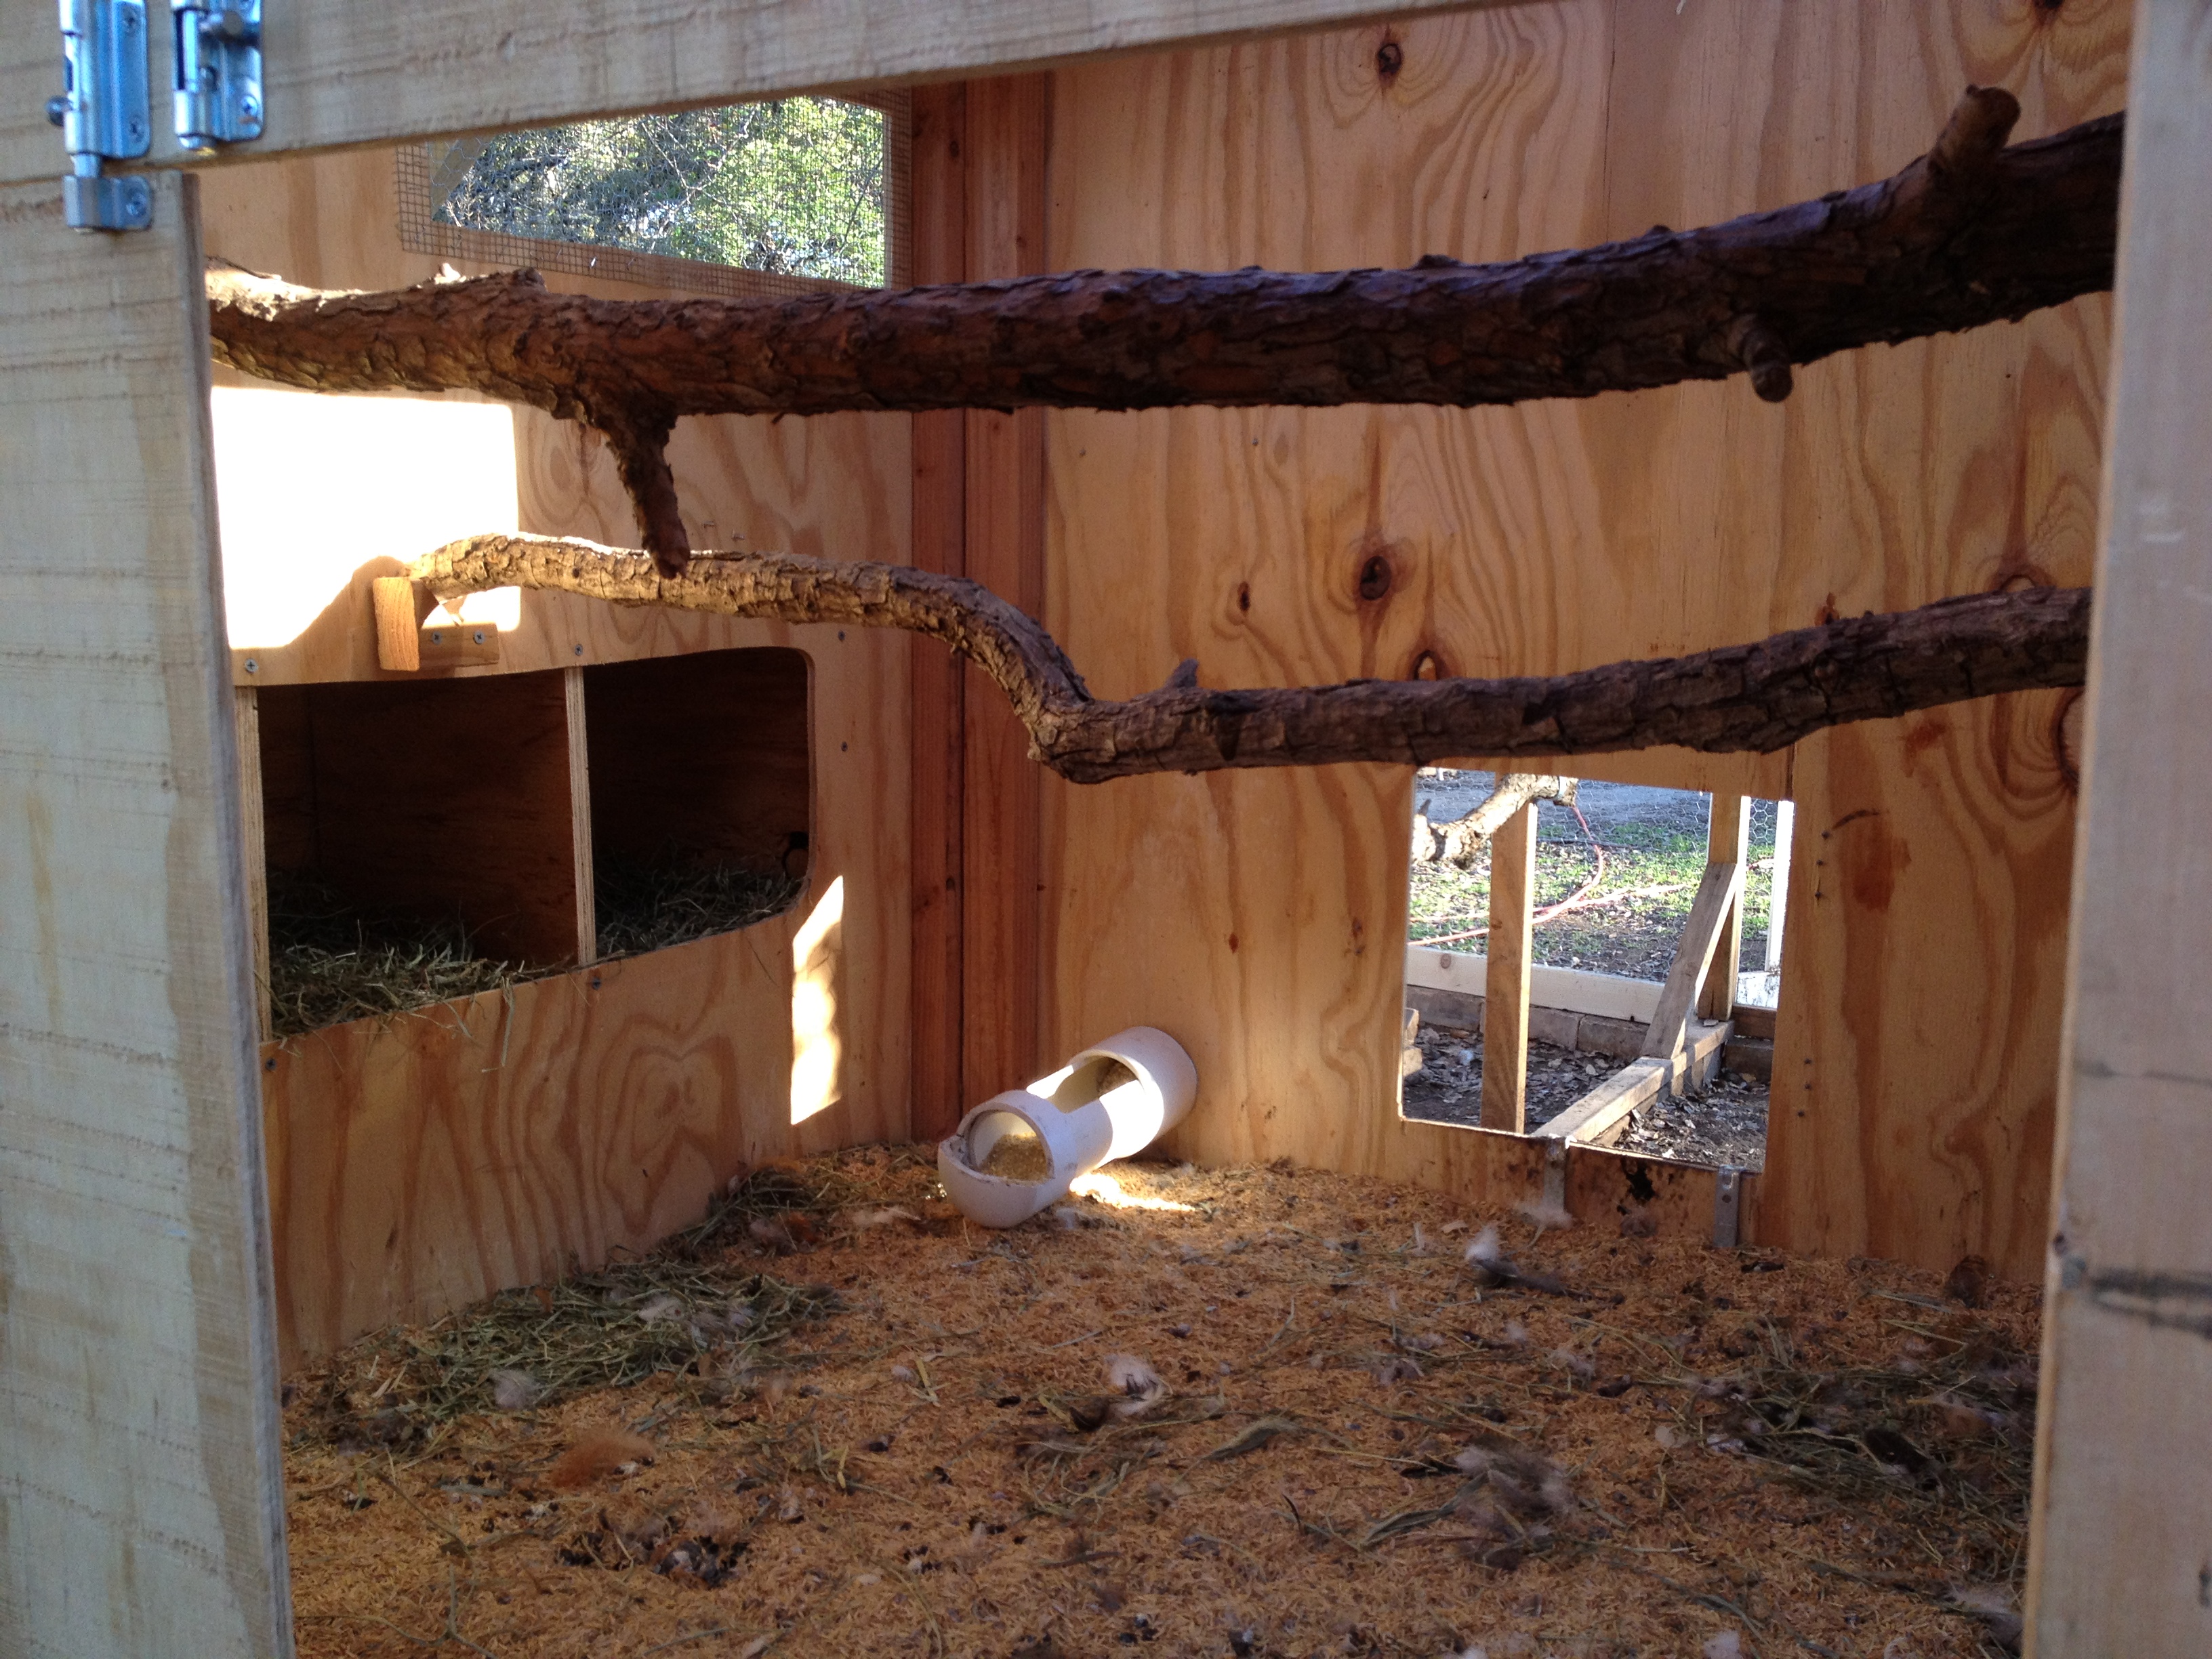 Inside the coop showing feeder, roosts and nestboxes